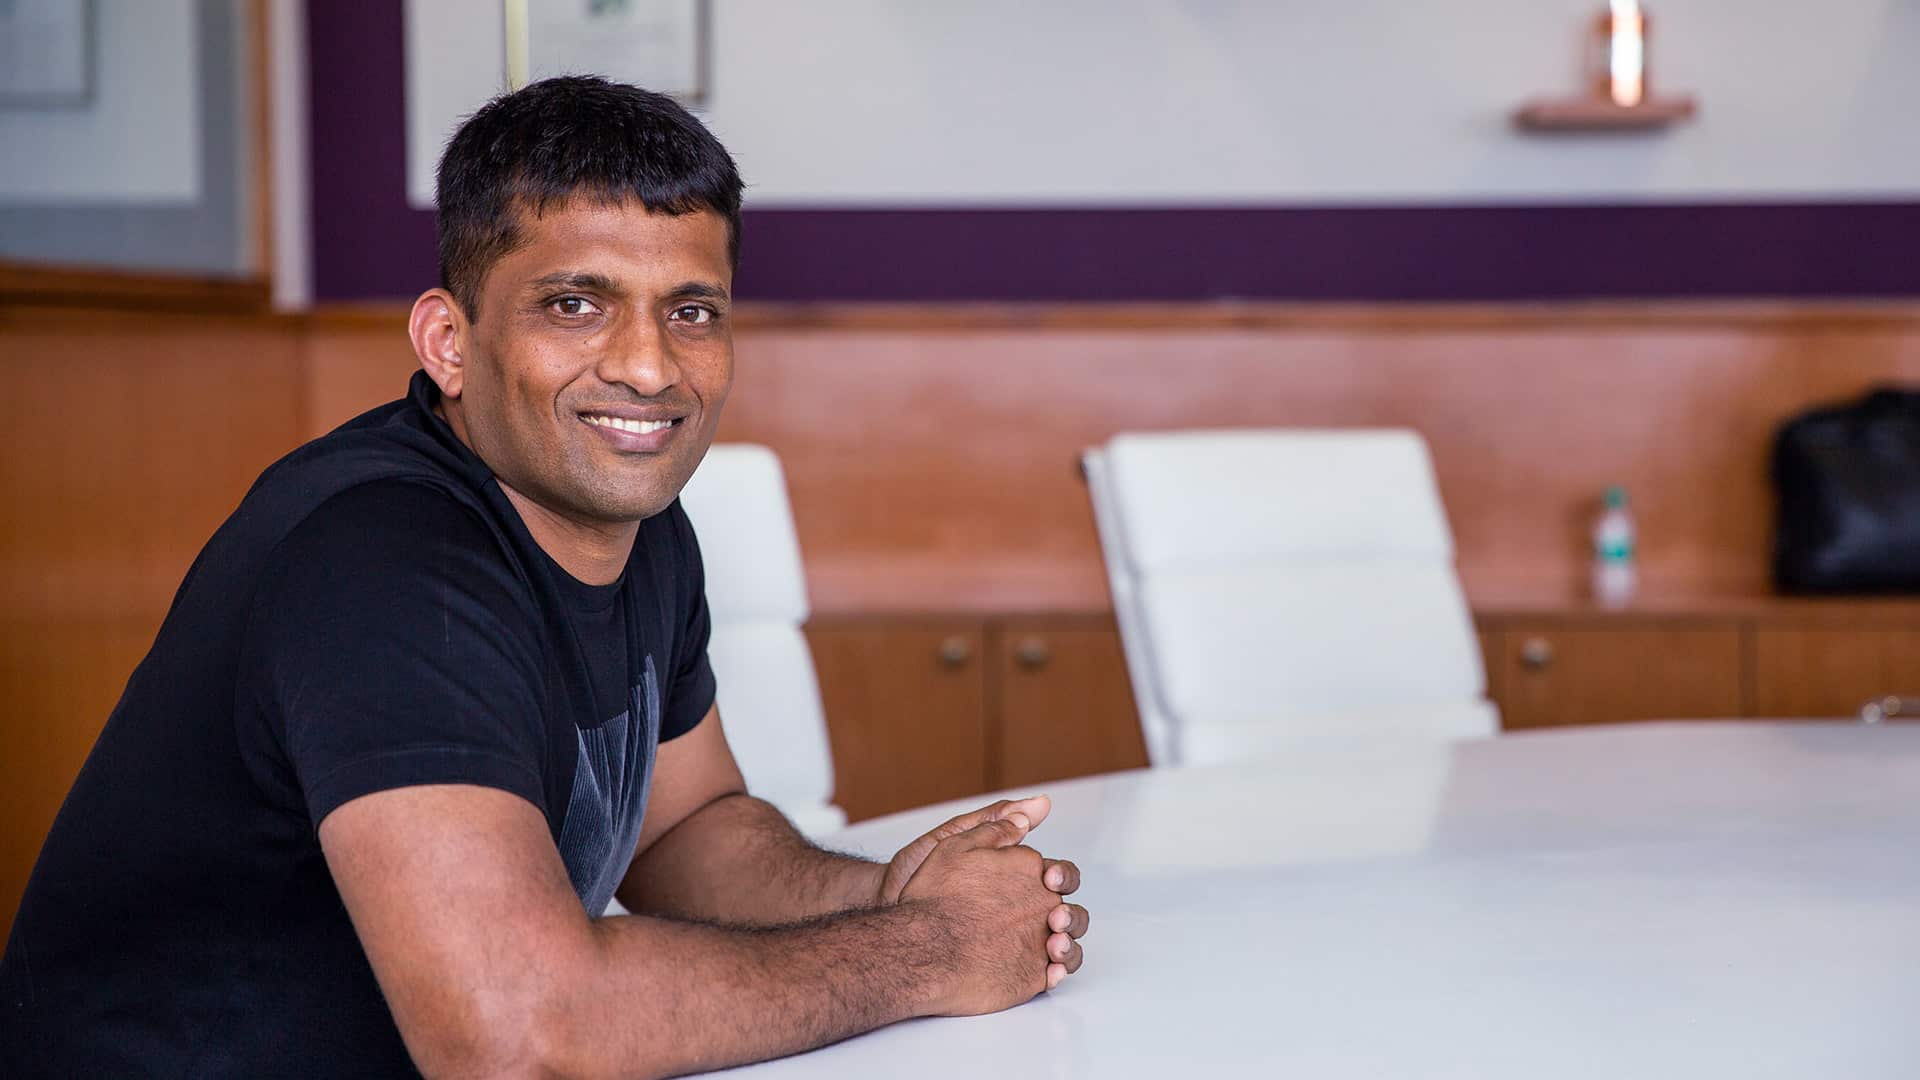 ED conducts searches against BYJU's CEO Raveendran CEO, says he never appeared for questioning